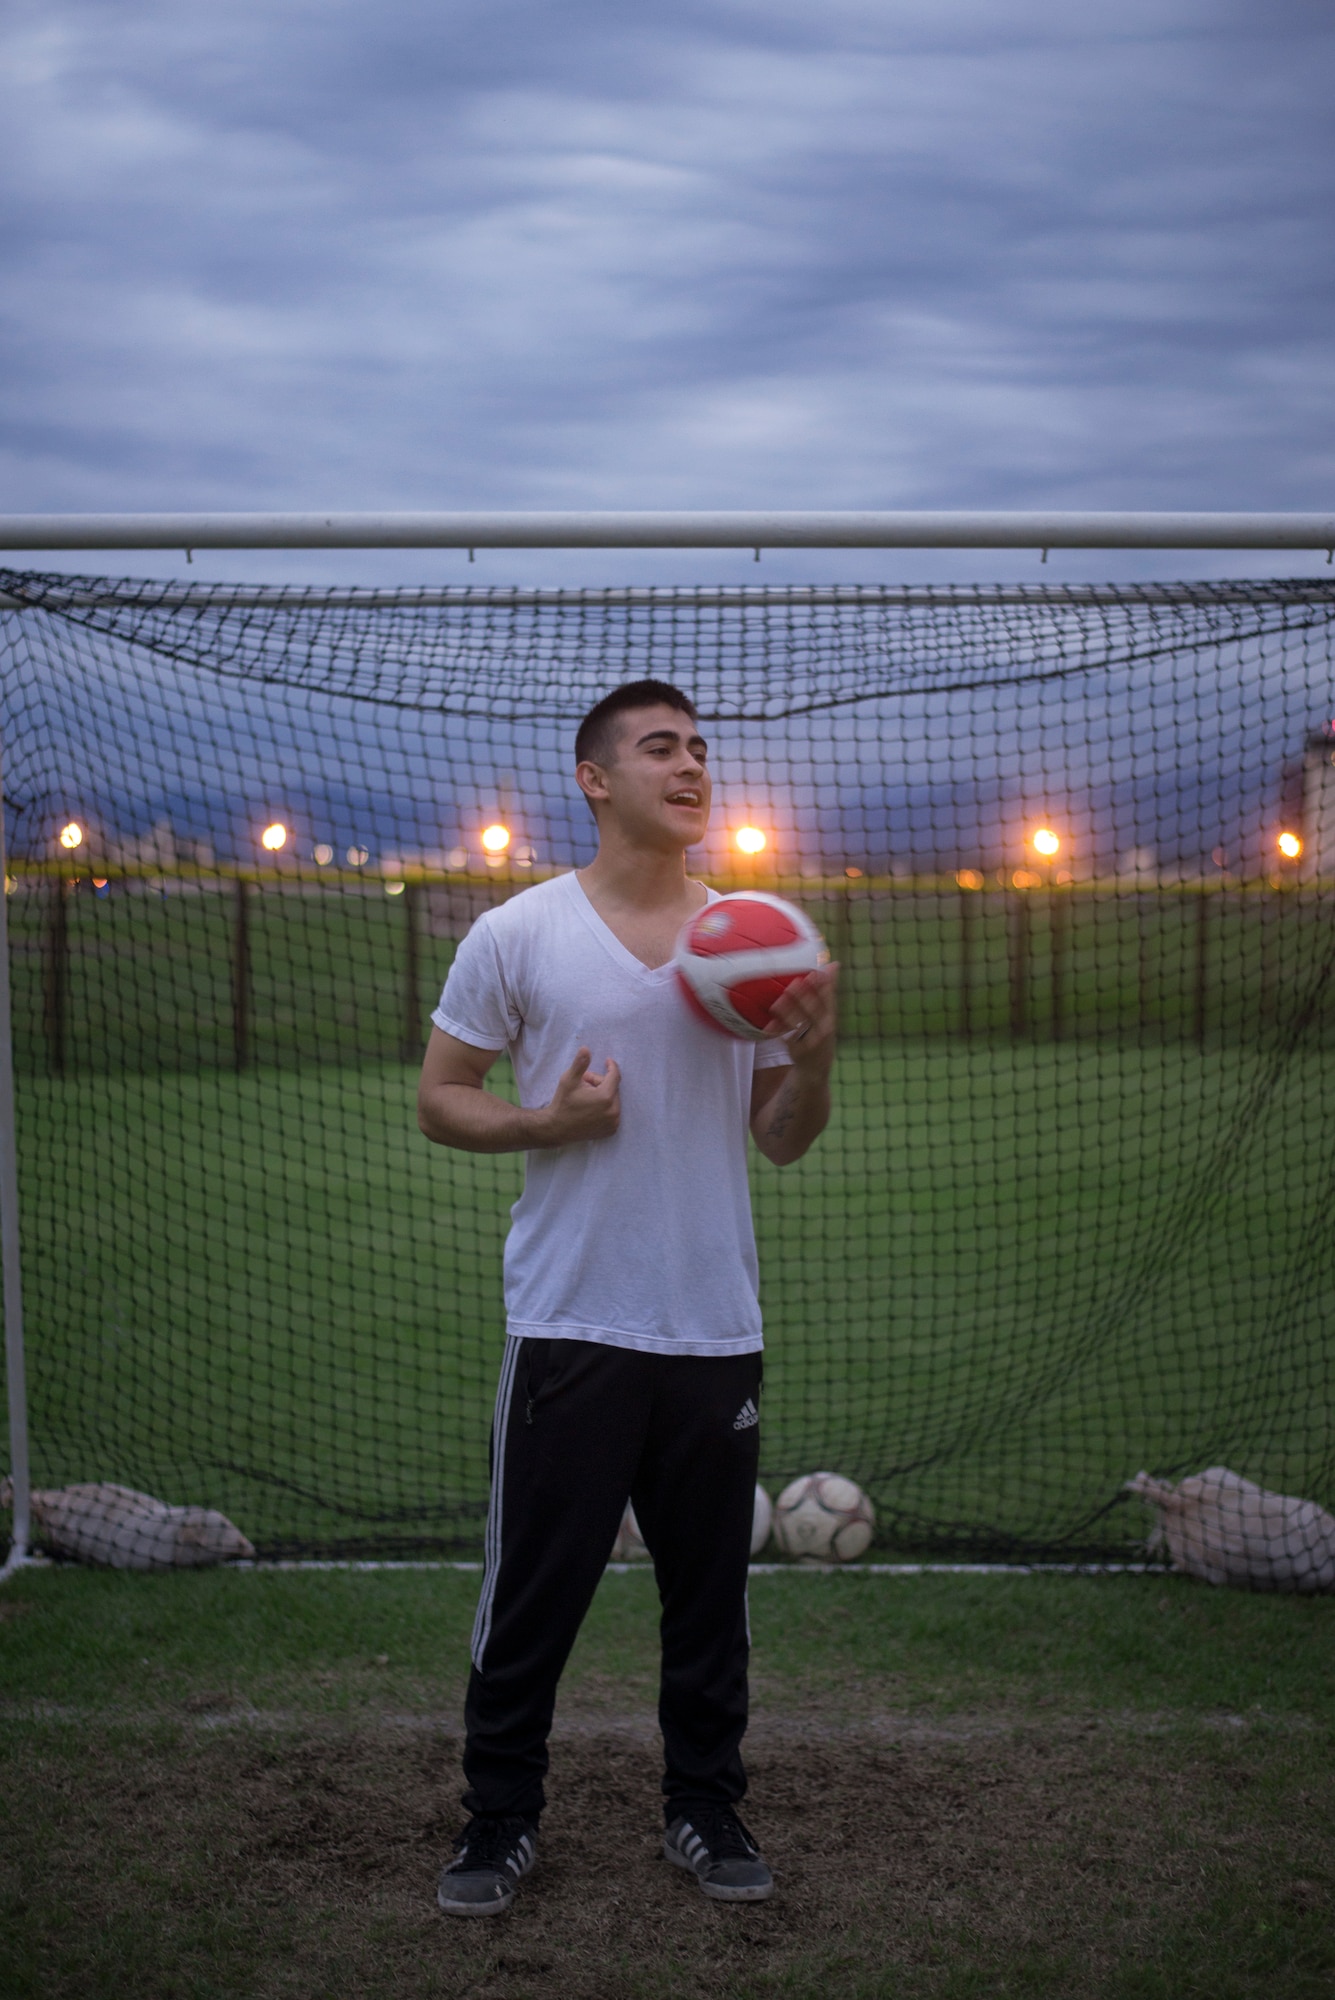 Airman 1st Class Tomasz Barba, volunteer soccer coach, handles a soccer ball at Yokota Air Base, Japan, Sept. 15, 2015. Barba said that he’s benefited from coaching as it allowed him to revisit and reinforce his own fundamentals. (U.S. Air Force photo by Airman 1st Class Delano Scott/Released)